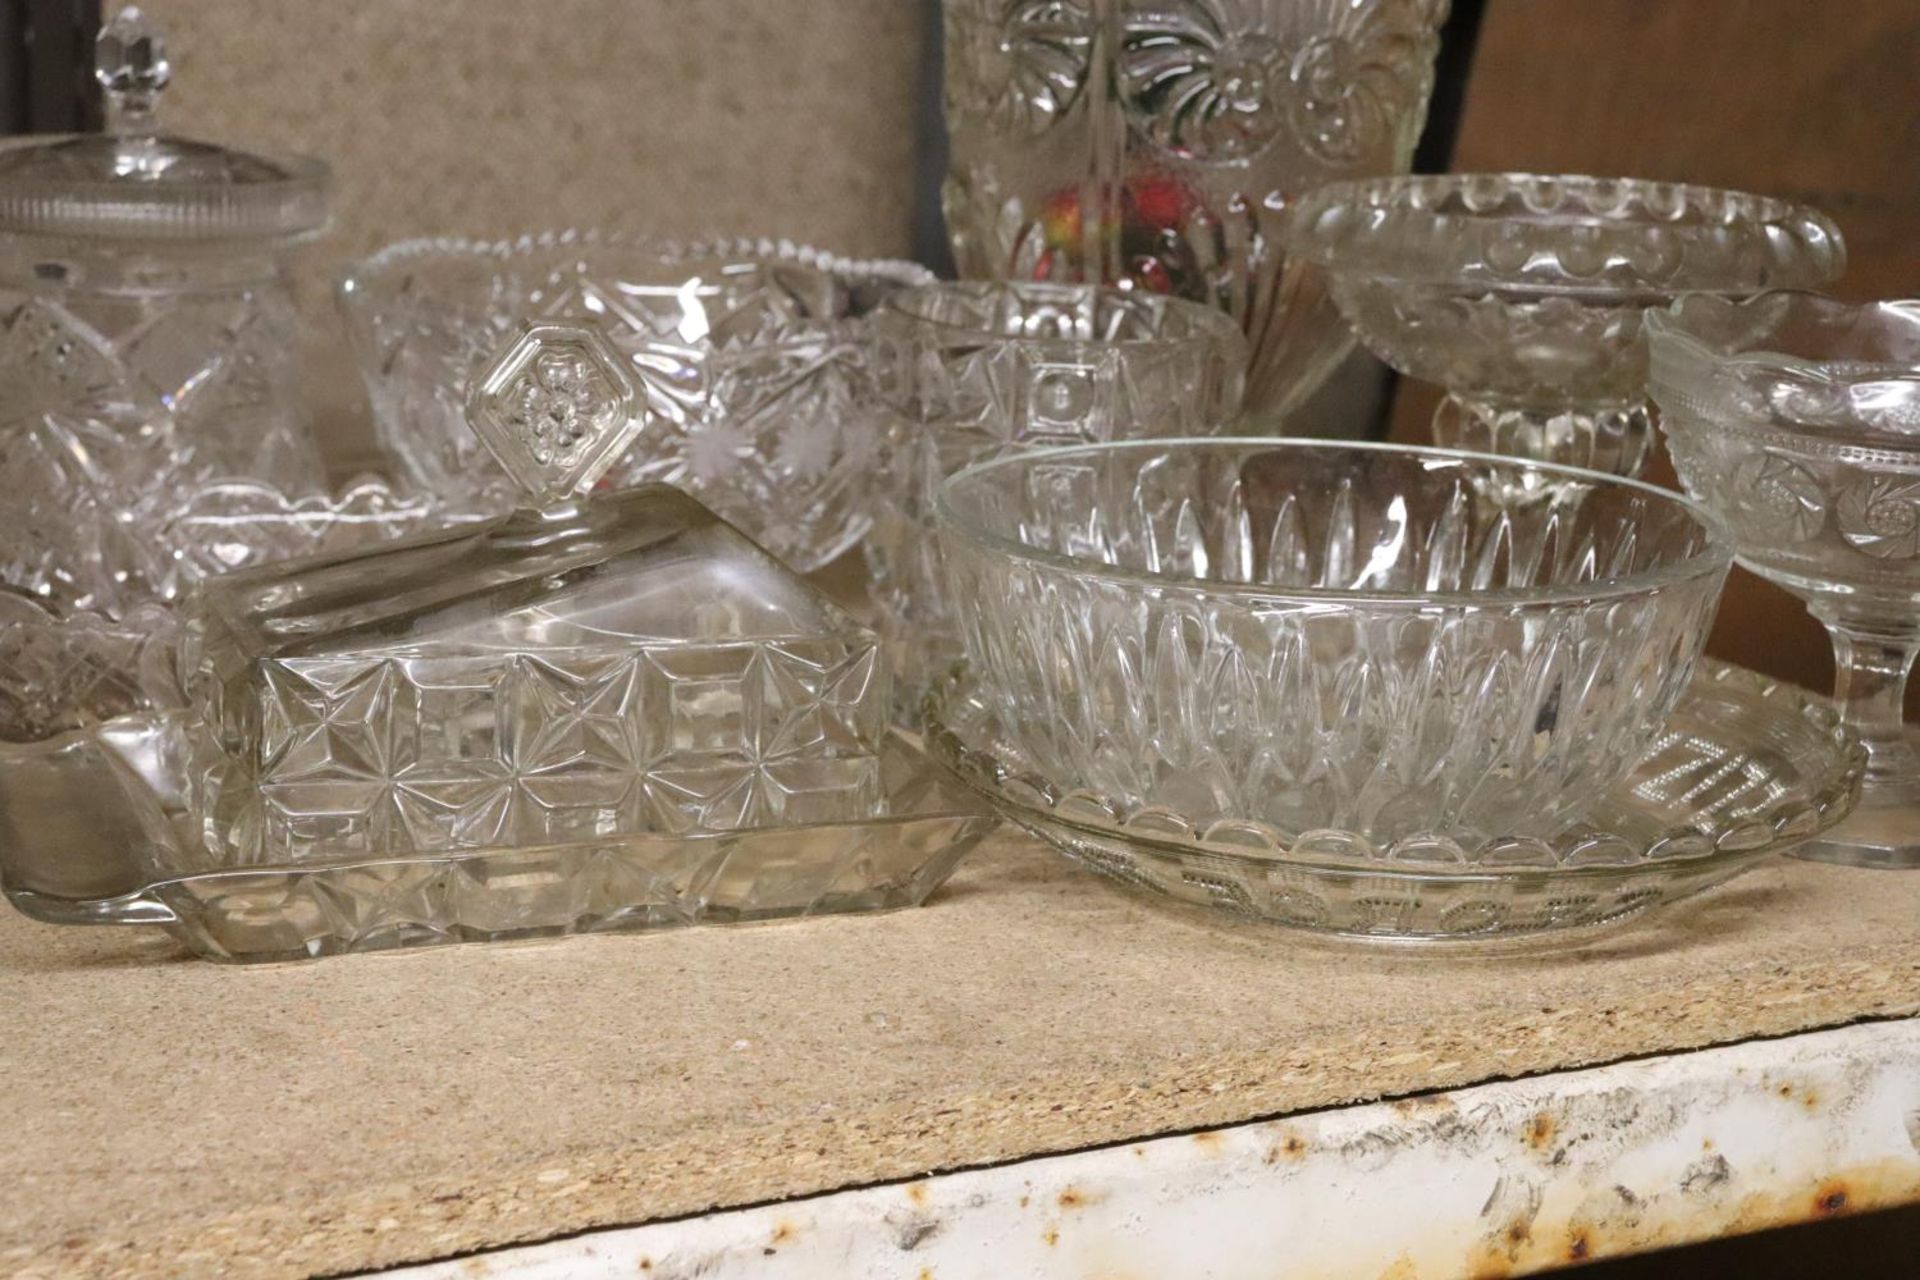 A QUANTITY OF GLASSWARE TO INCLUDE A LARGE VASE, BOWLS, FOOTED BOWLS, A CHEESE DISH, ETC - Image 2 of 5